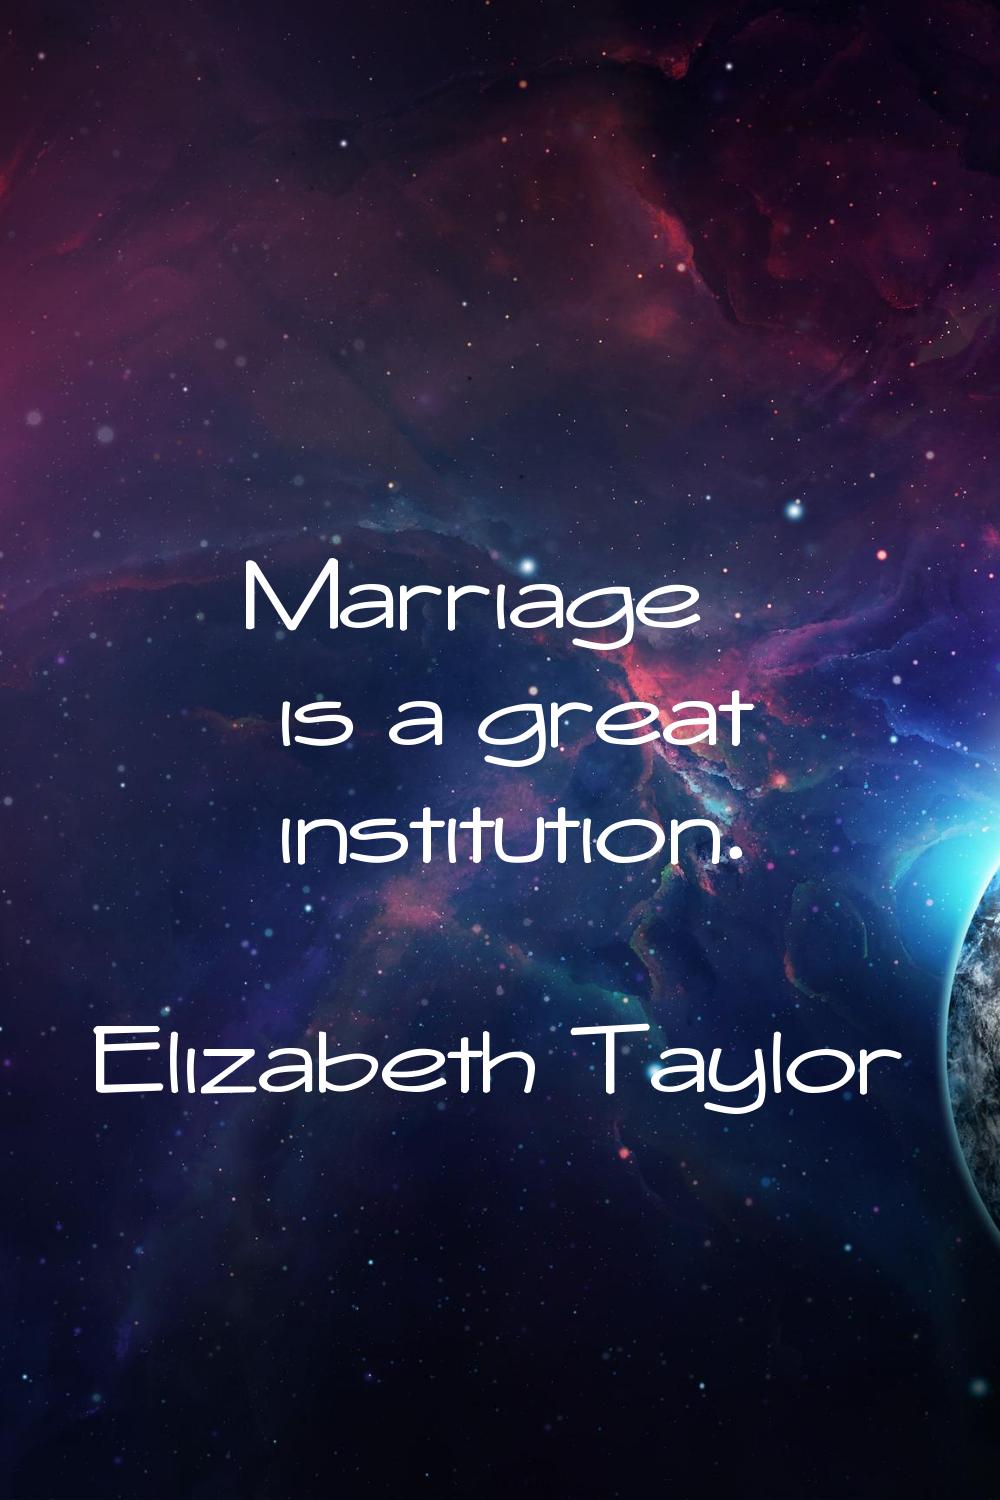 Marriage is a great institution.